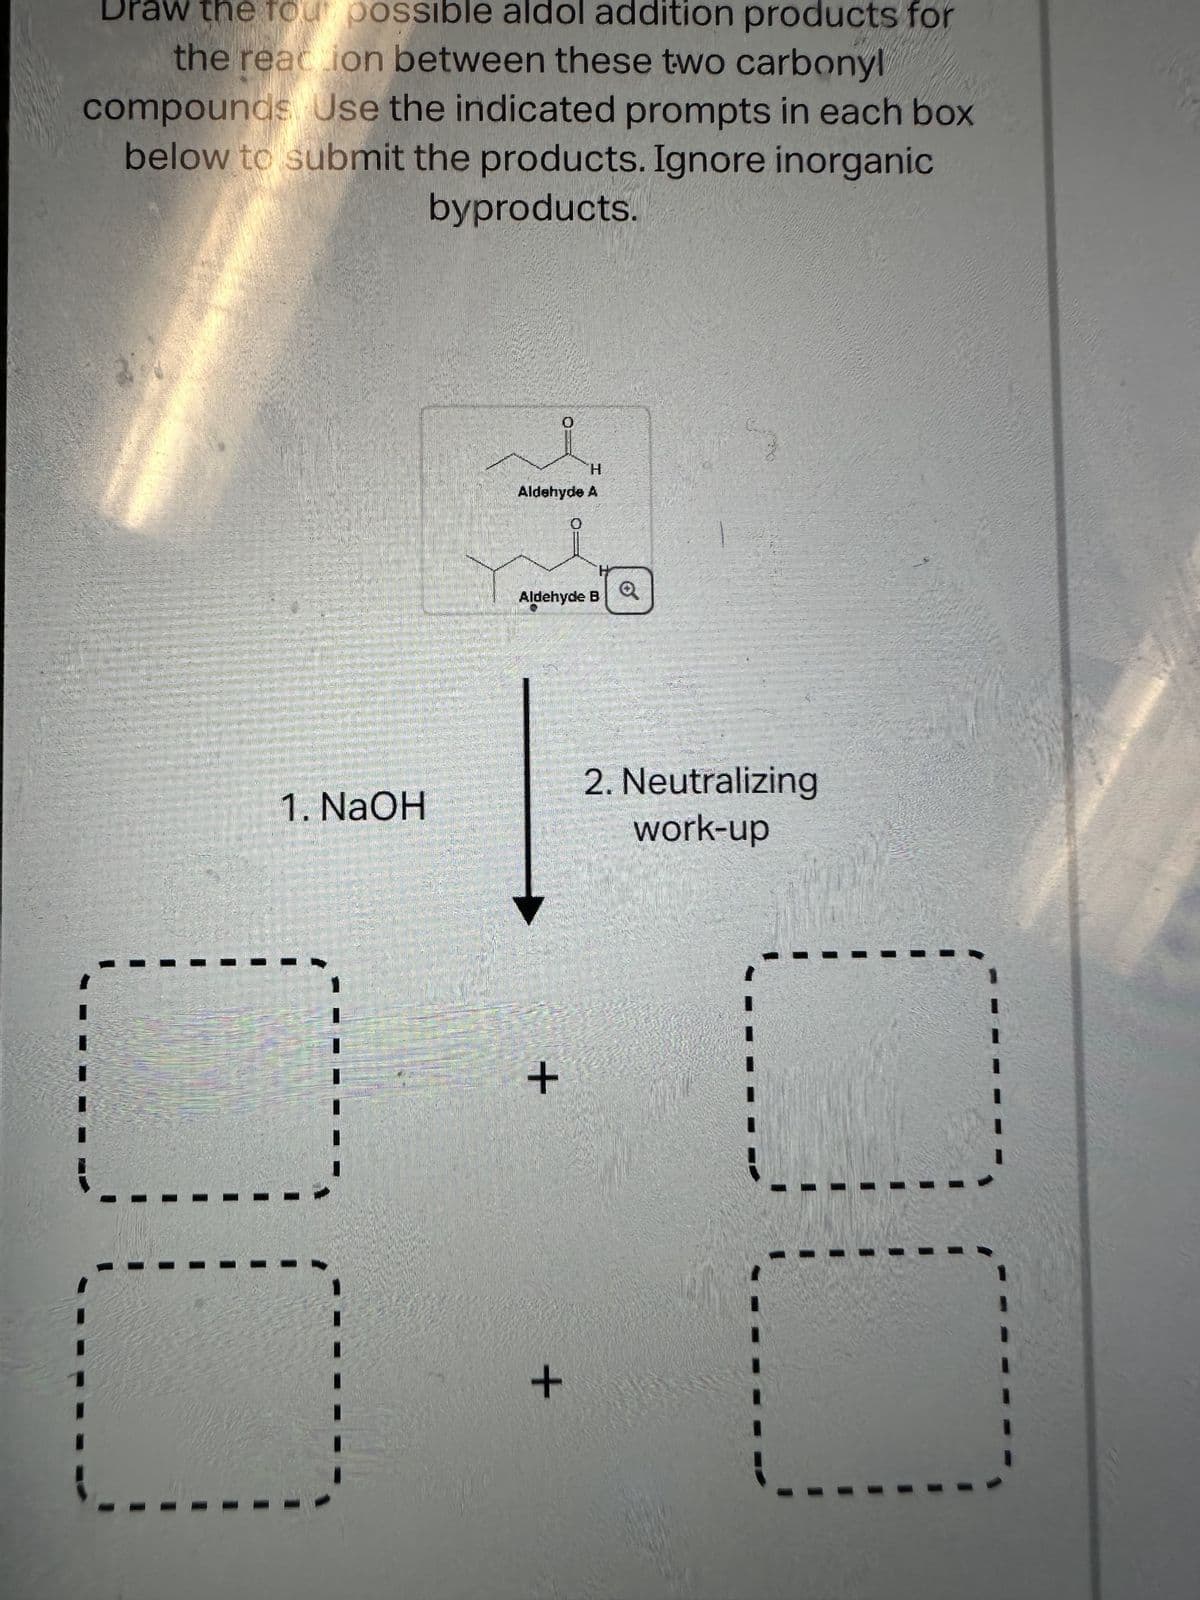 Draw the four possible aldol addition products for
the reaction between these two carbonyl
compounds Use the indicated prompts in each box
below to submit the products. Ignore inorganic
byproducts.
1. NaOH
0
H
Aldehyde A
+
Aldehyde B
0
+
2. Neutralizing
work-up
--